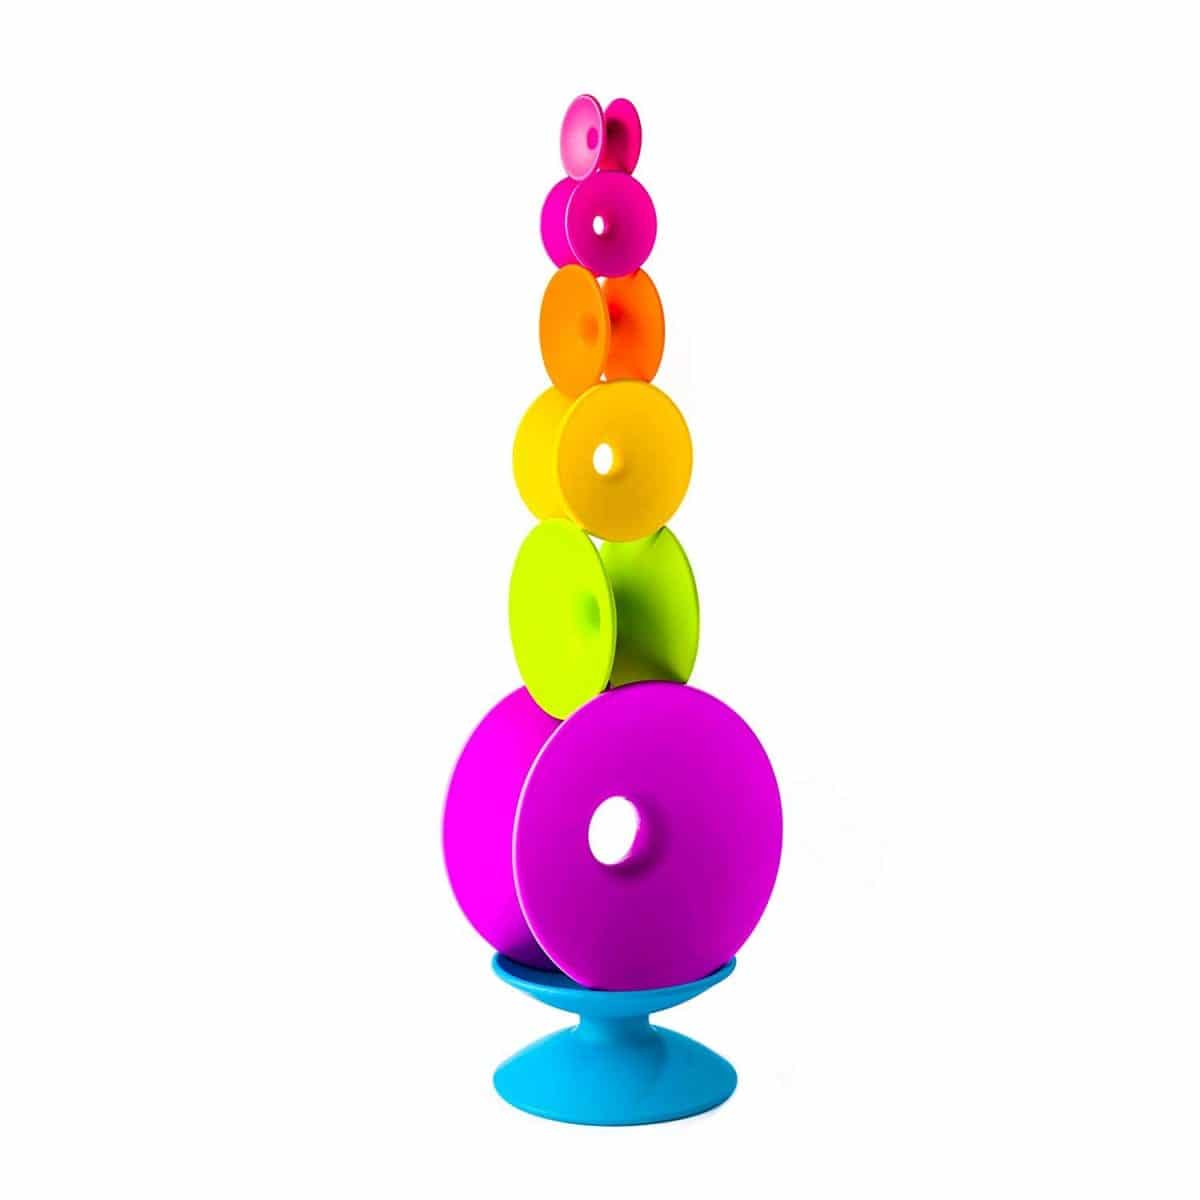 stackable toys for toddlers